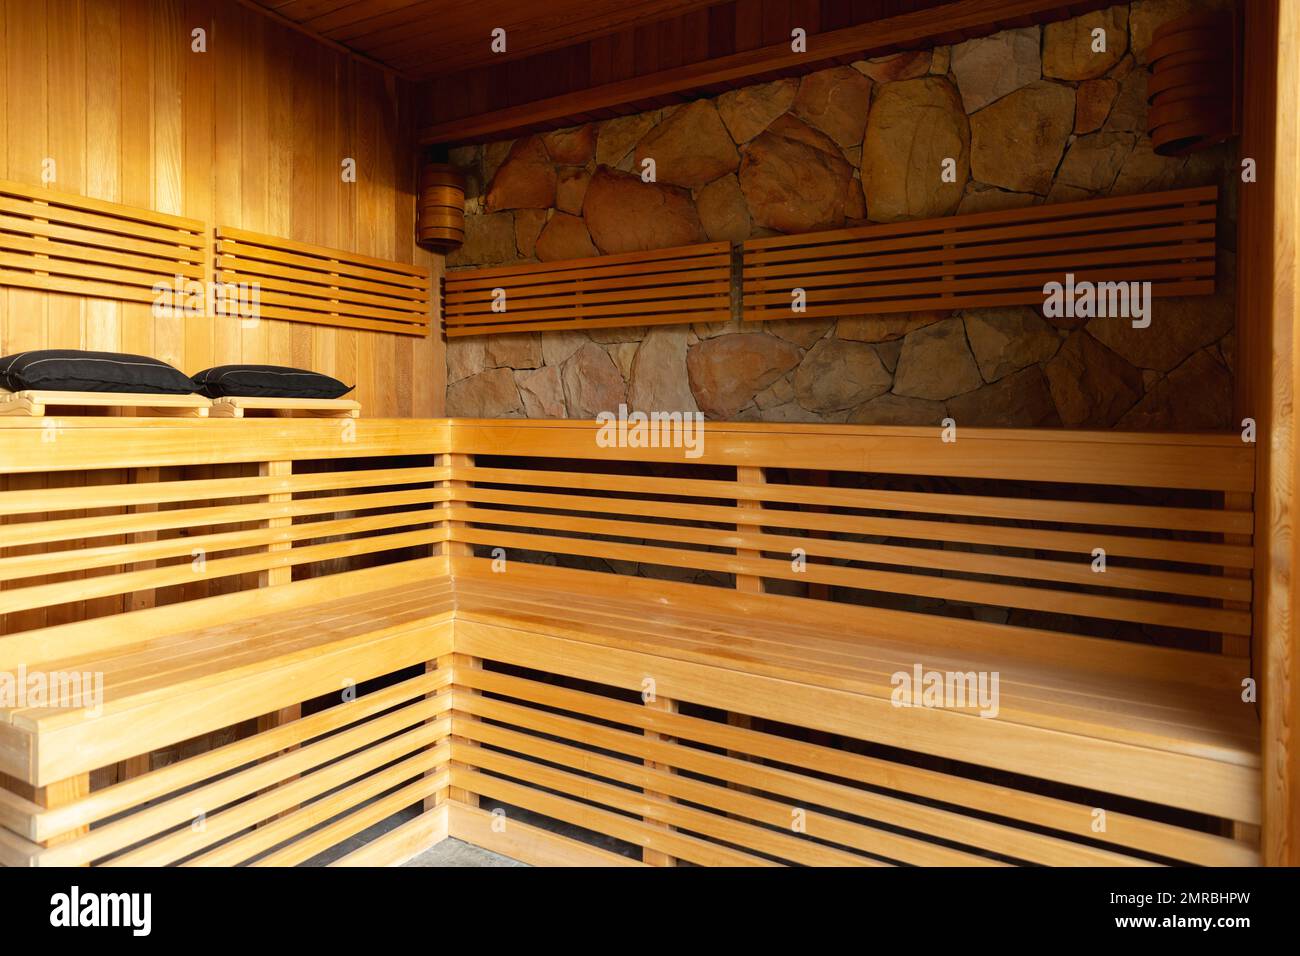 Wooden benches in sauna room at health spa, copy space Stock Photo